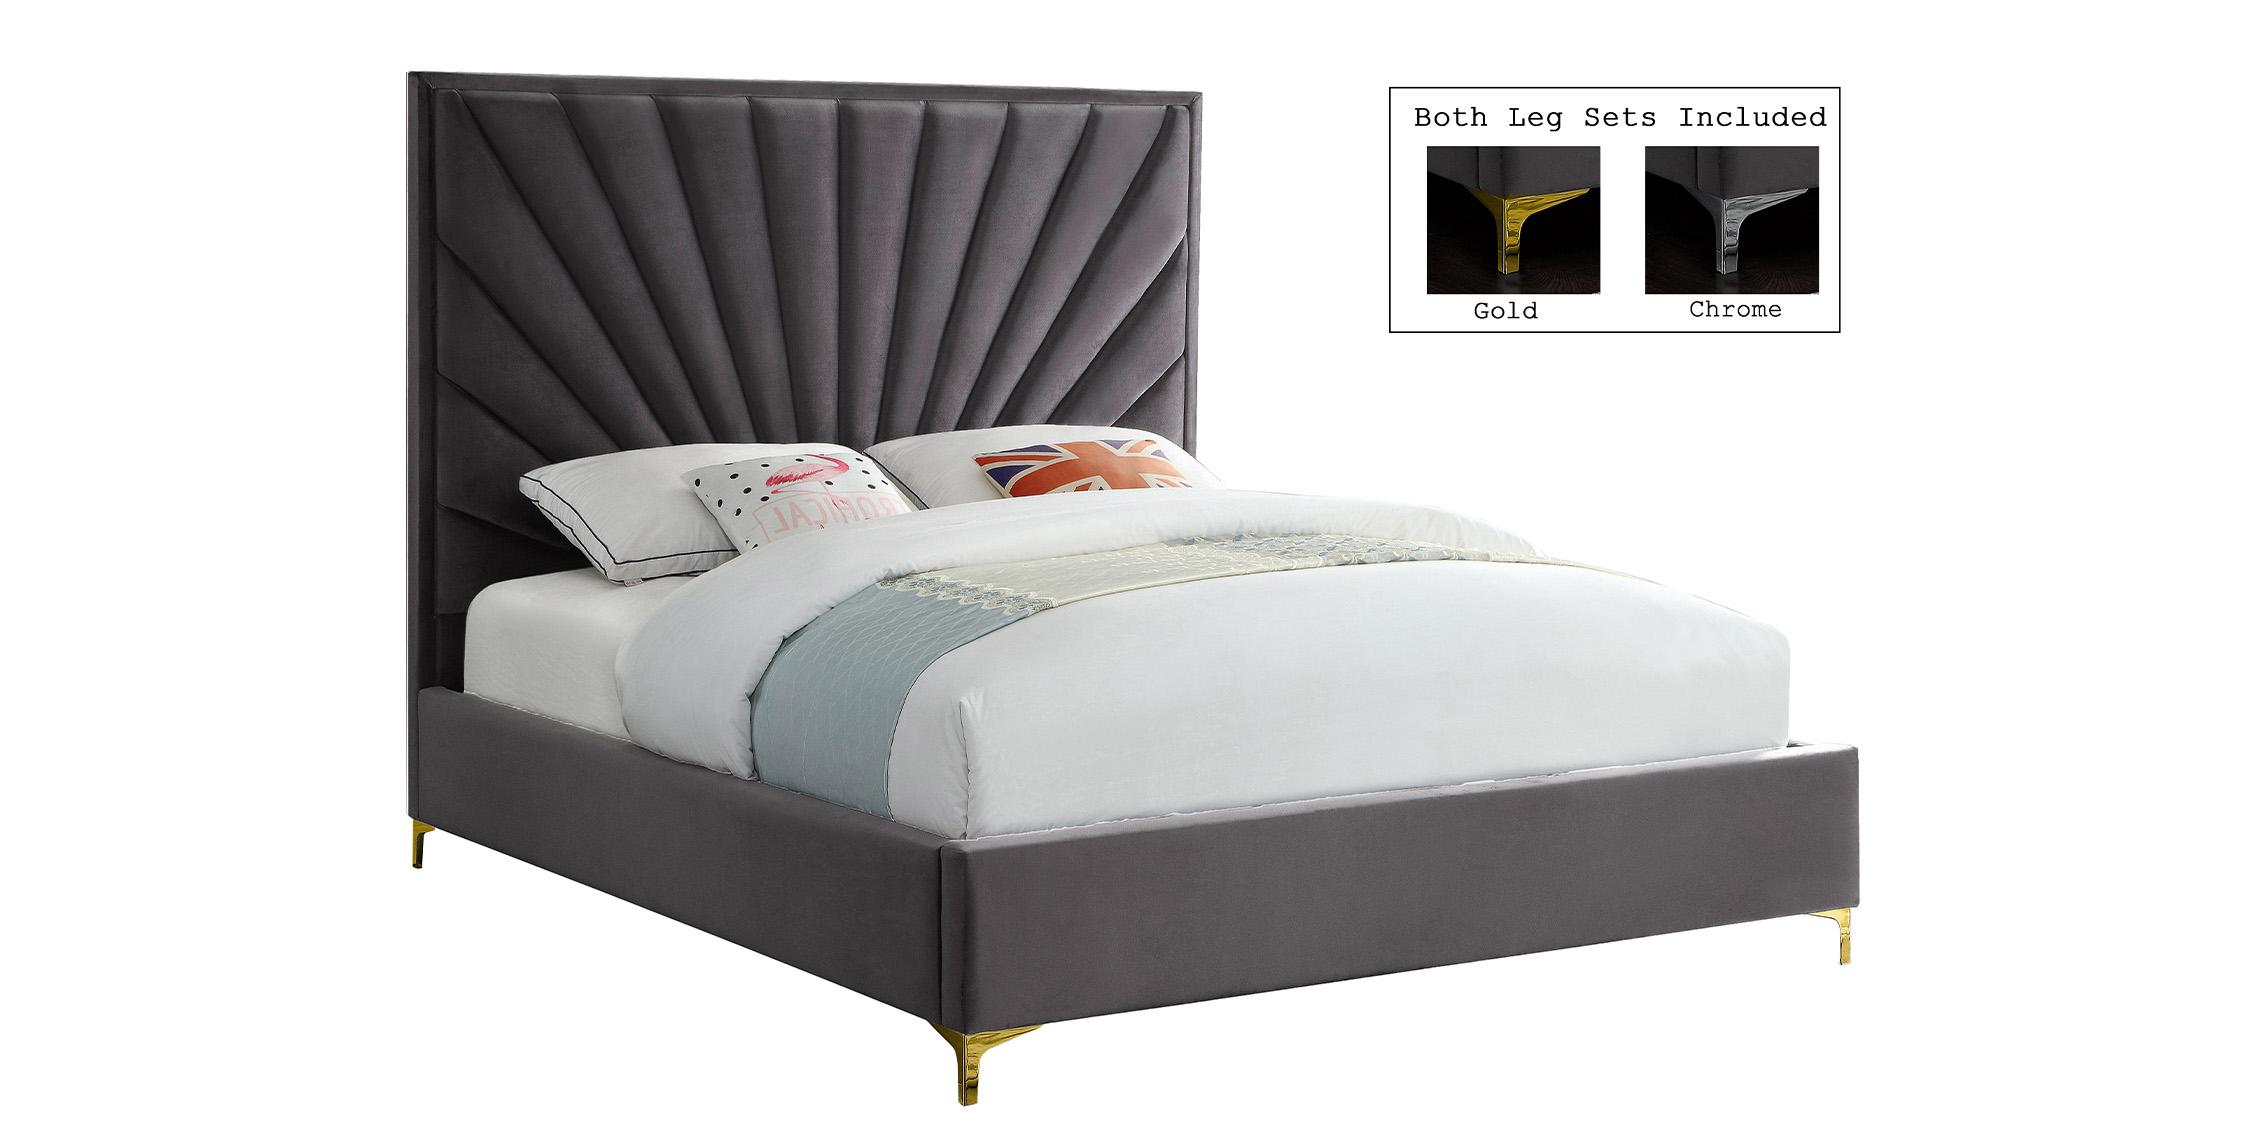 

    
Luxurious Grey Velvet Tufted King Bed ECLIPSE Meridian Contemporary Modern
